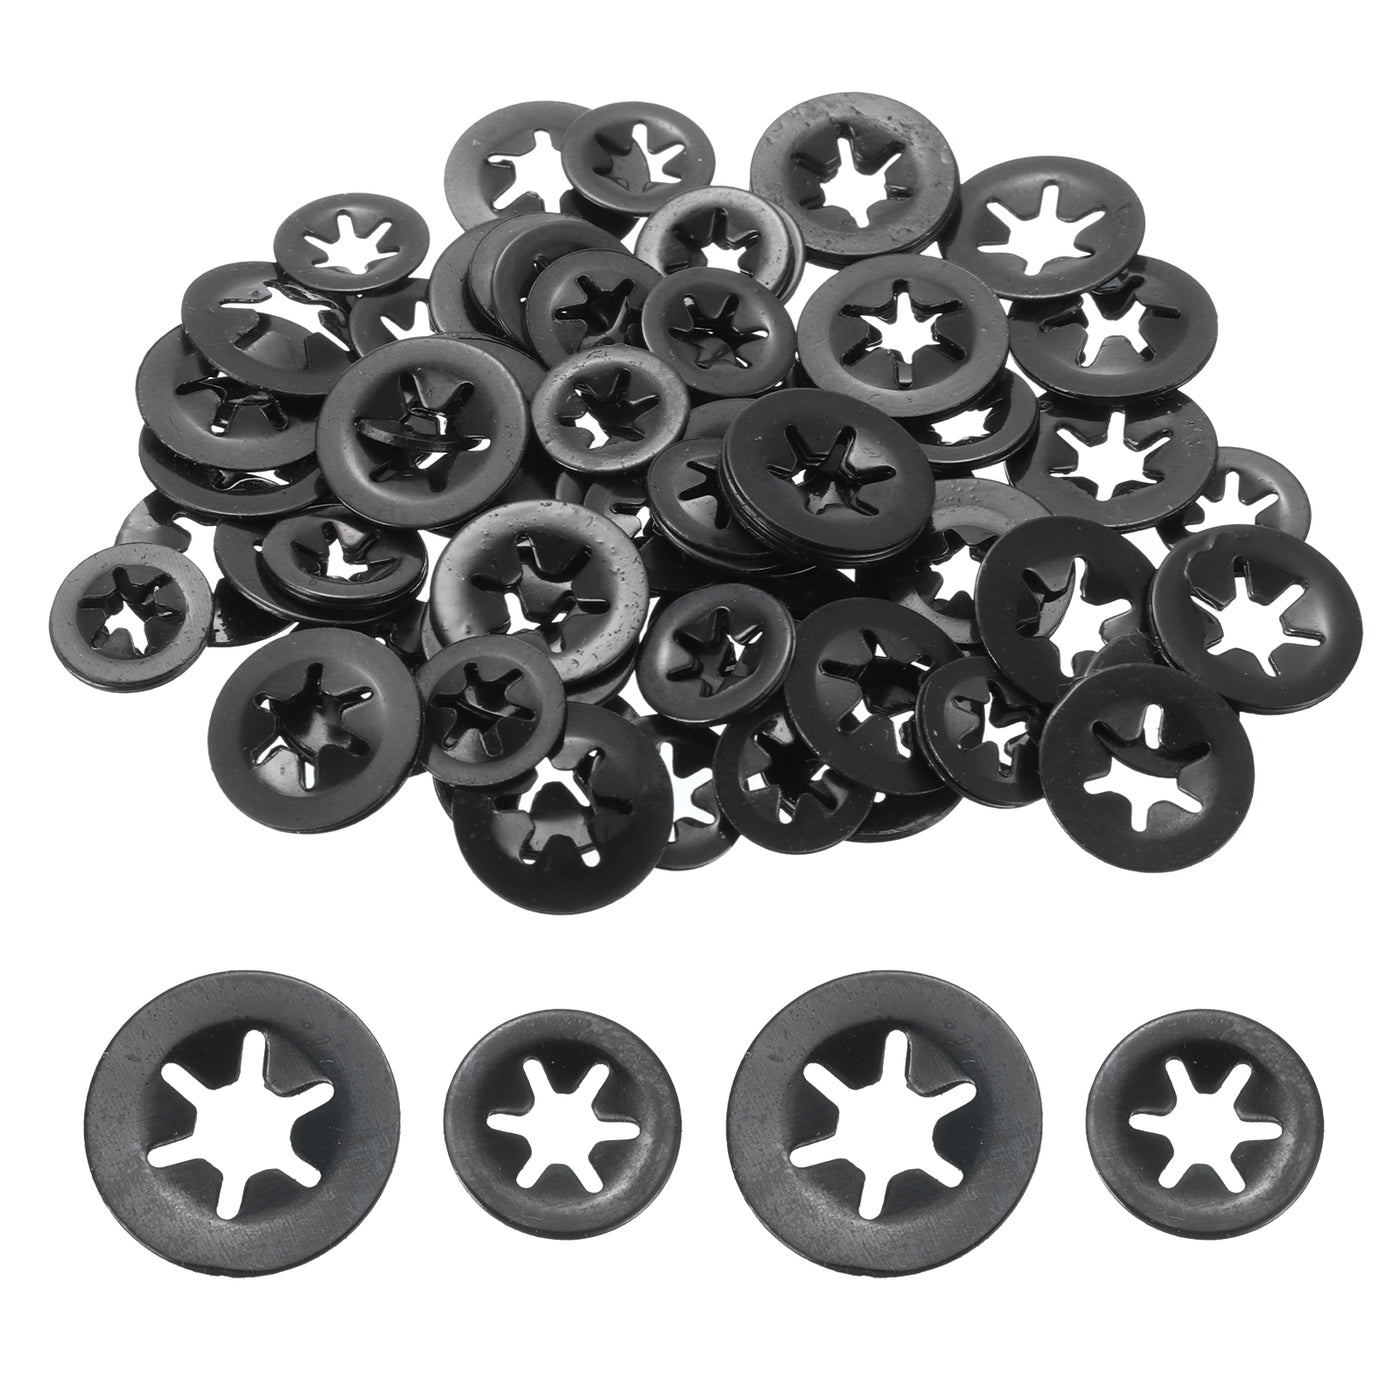 uxcell Uxcell 100pcs Internal Tooth Star Lock Washers M3 M4 Speed Locking Washers, 65Mn Steel